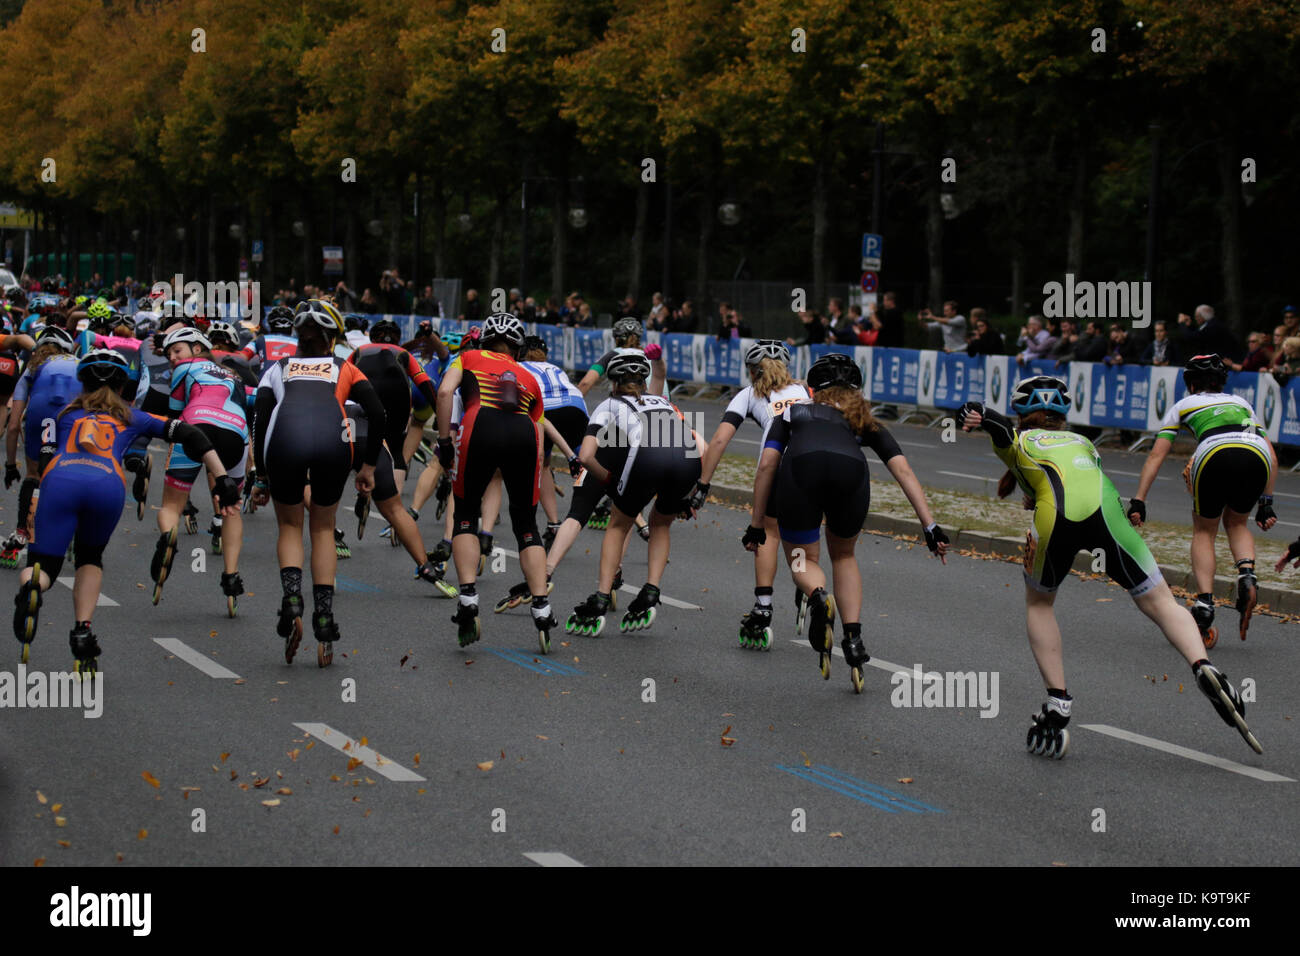 Berlin, Germany. 23rd Sep, 2017. The elite female skaters start the race. Over 5,500 skater took part in the 2017 BMW Berlin Marathon Inline skating race, a day ahead of the Marathon race. Bart Swings from Belgium won the race in 58:42 for the 5th year in a row. Credit: Michael Debets/Pacific Press/Alamy Live News Stock Photo